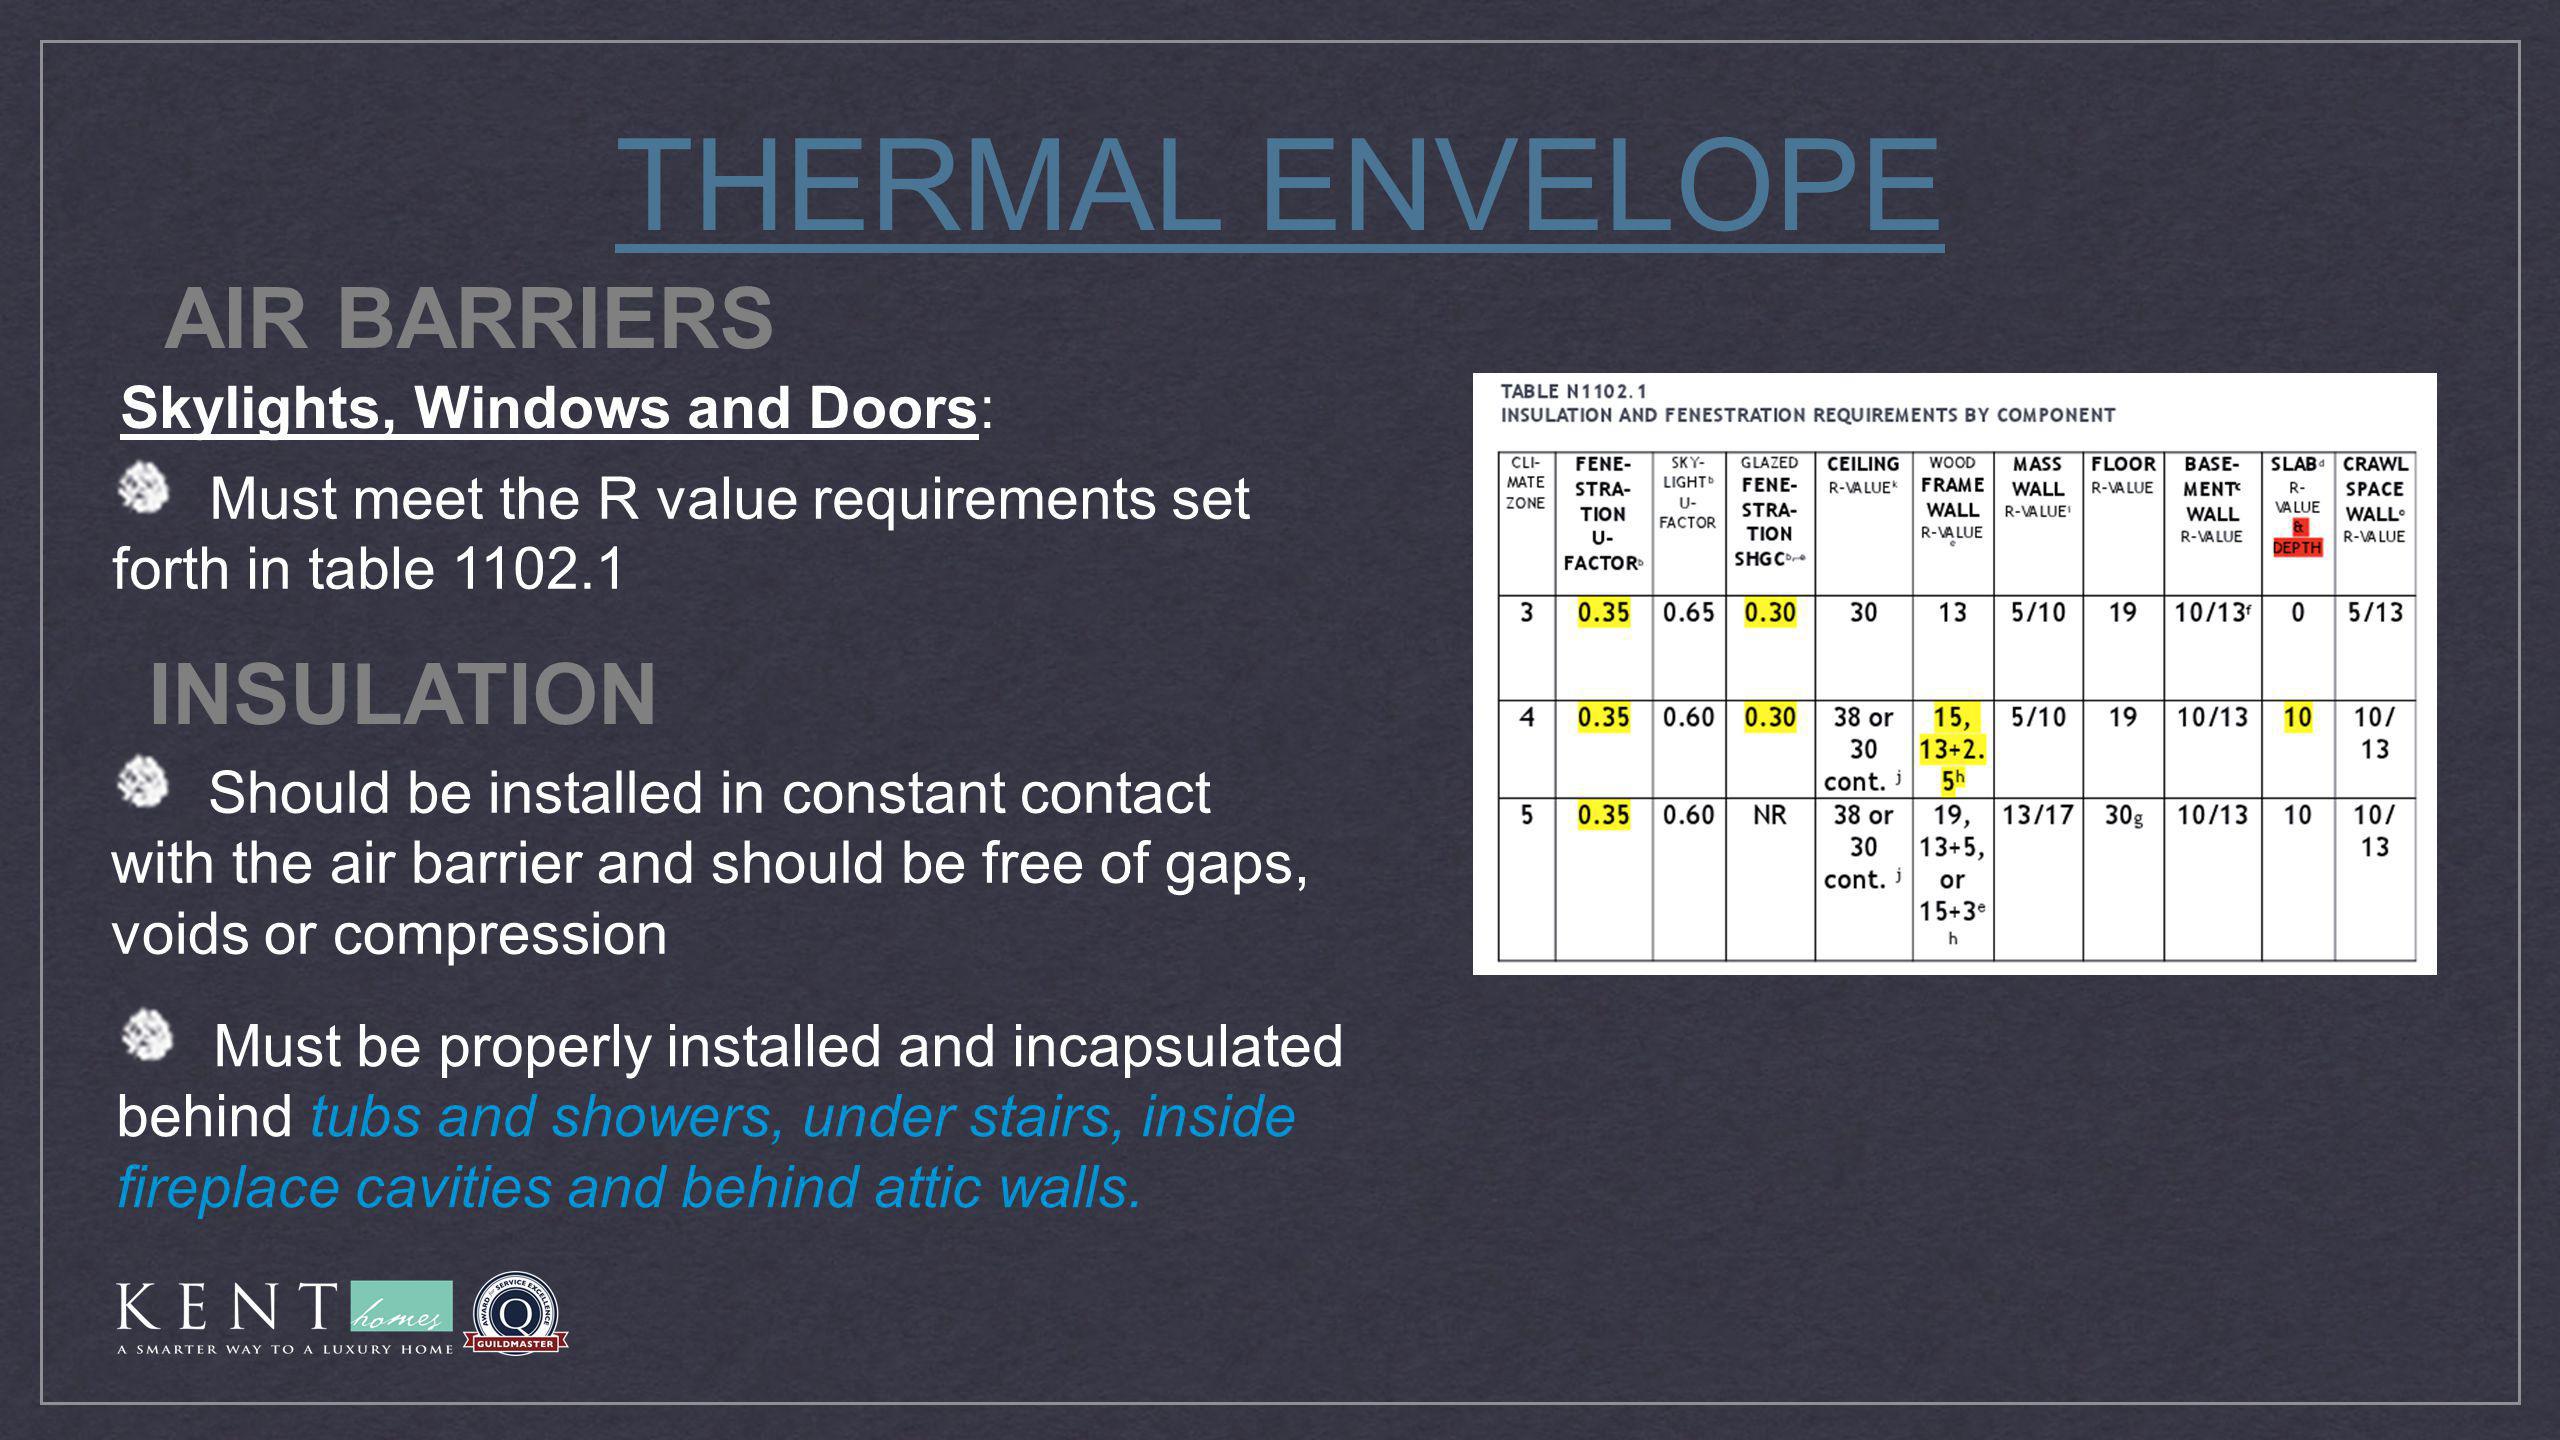 THERMAL ENVELOPE Must meet the R value requirements set forth in table Should be installed in constant contact with the air barrier and should be free of gaps, voids or compression Must be properly installed and incapsulated behind tubs and showers, under stairs, inside fireplace cavities and behind attic walls.